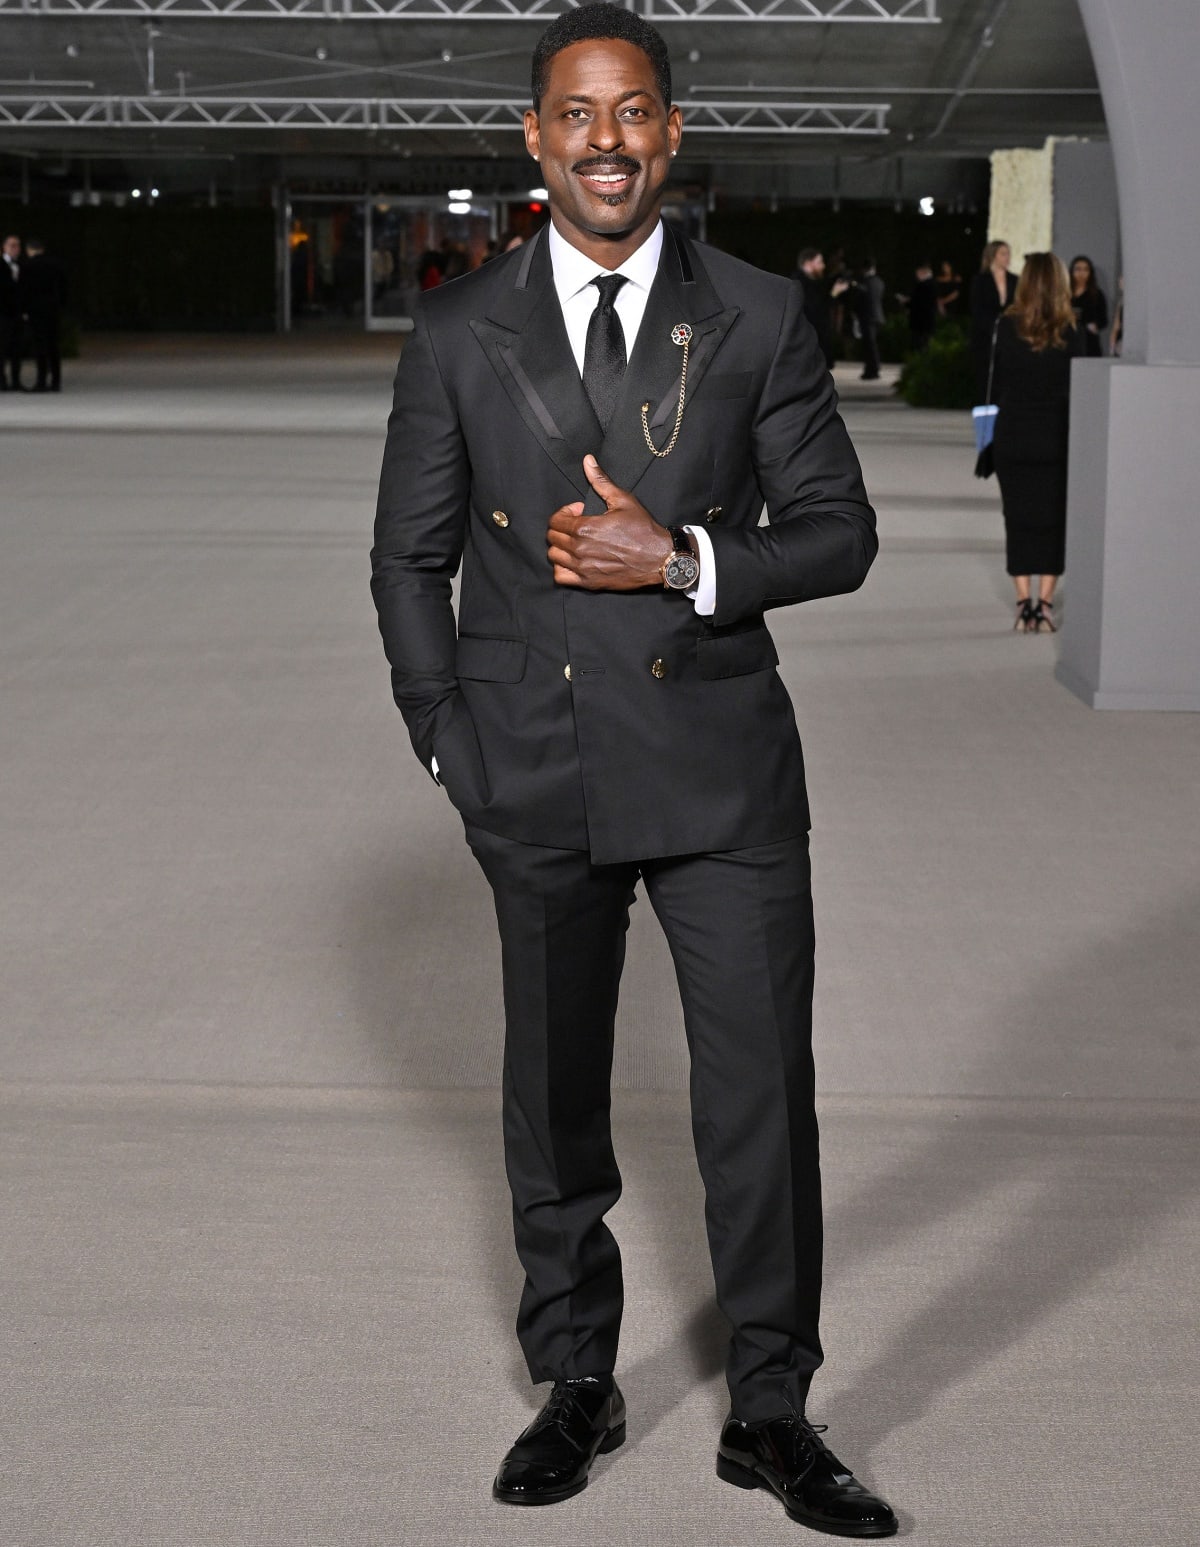 Sterling K. Brown attended the 2nd Annual Academy Museum Gala